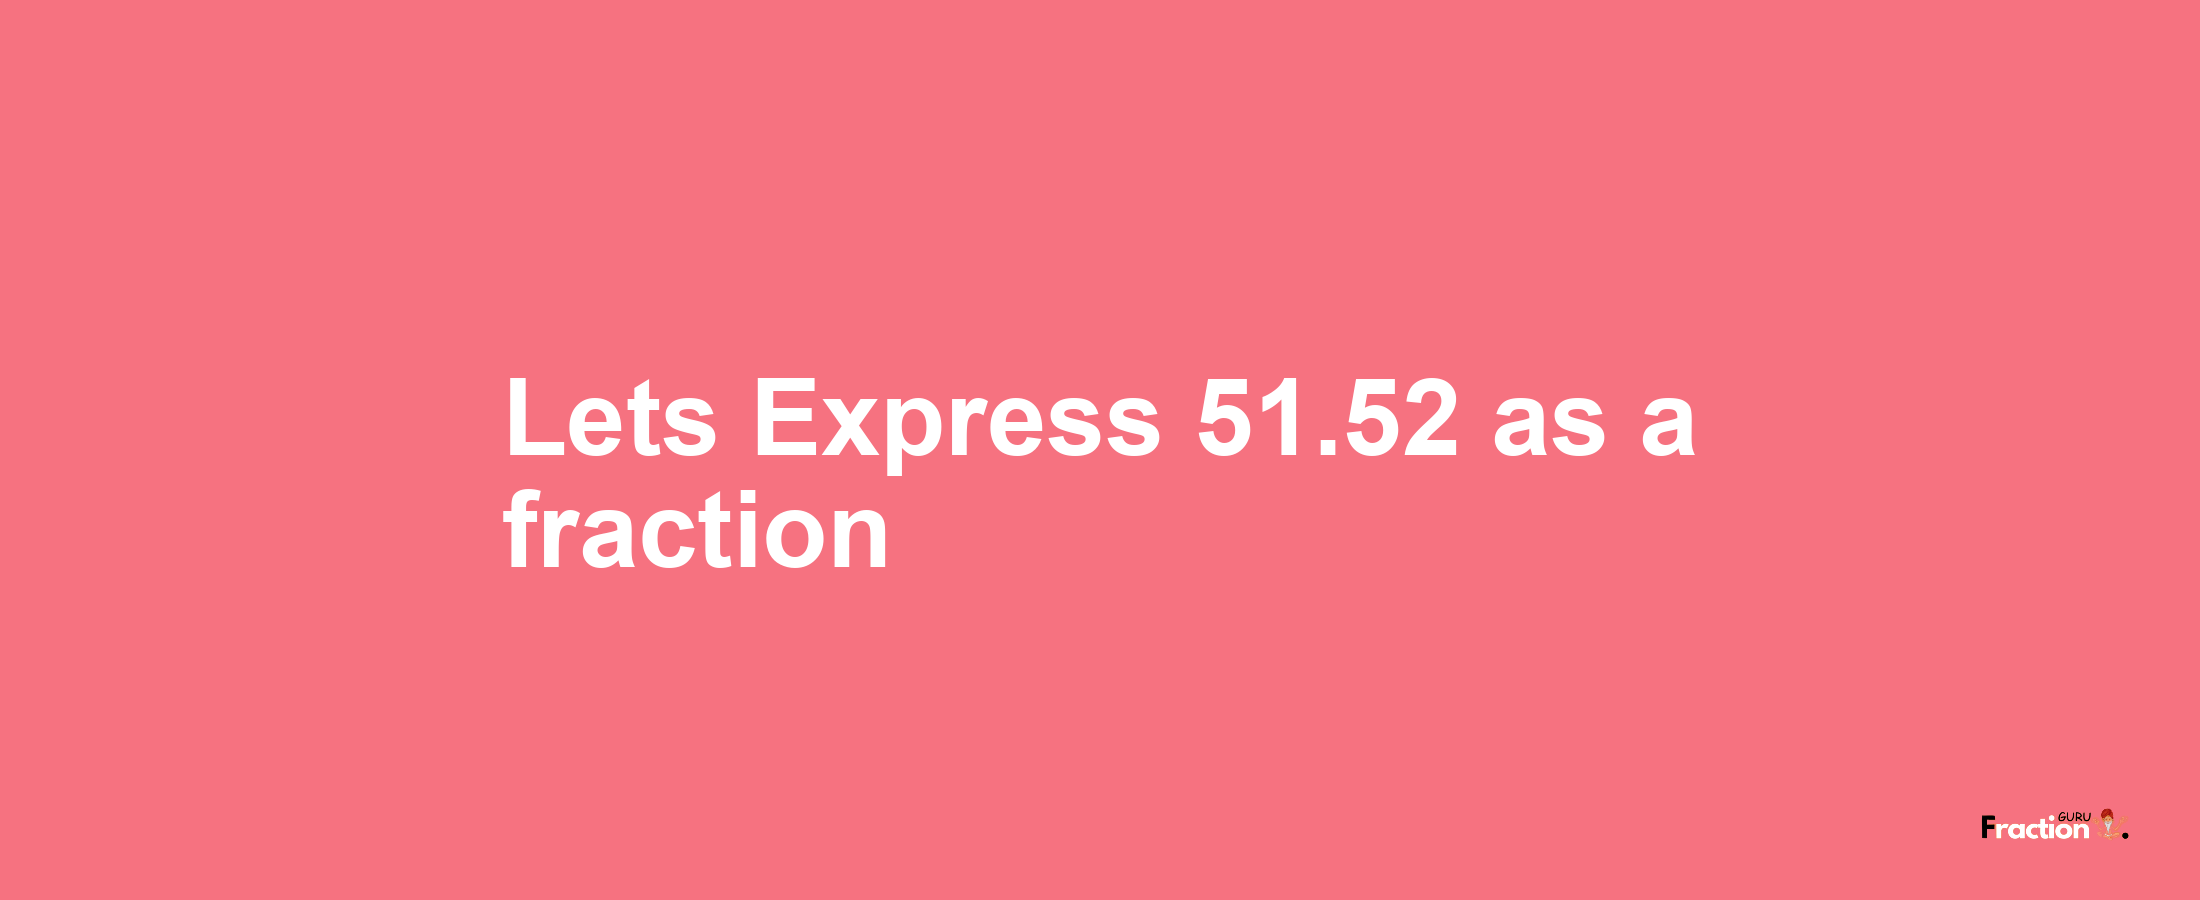 Lets Express 51.52 as afraction